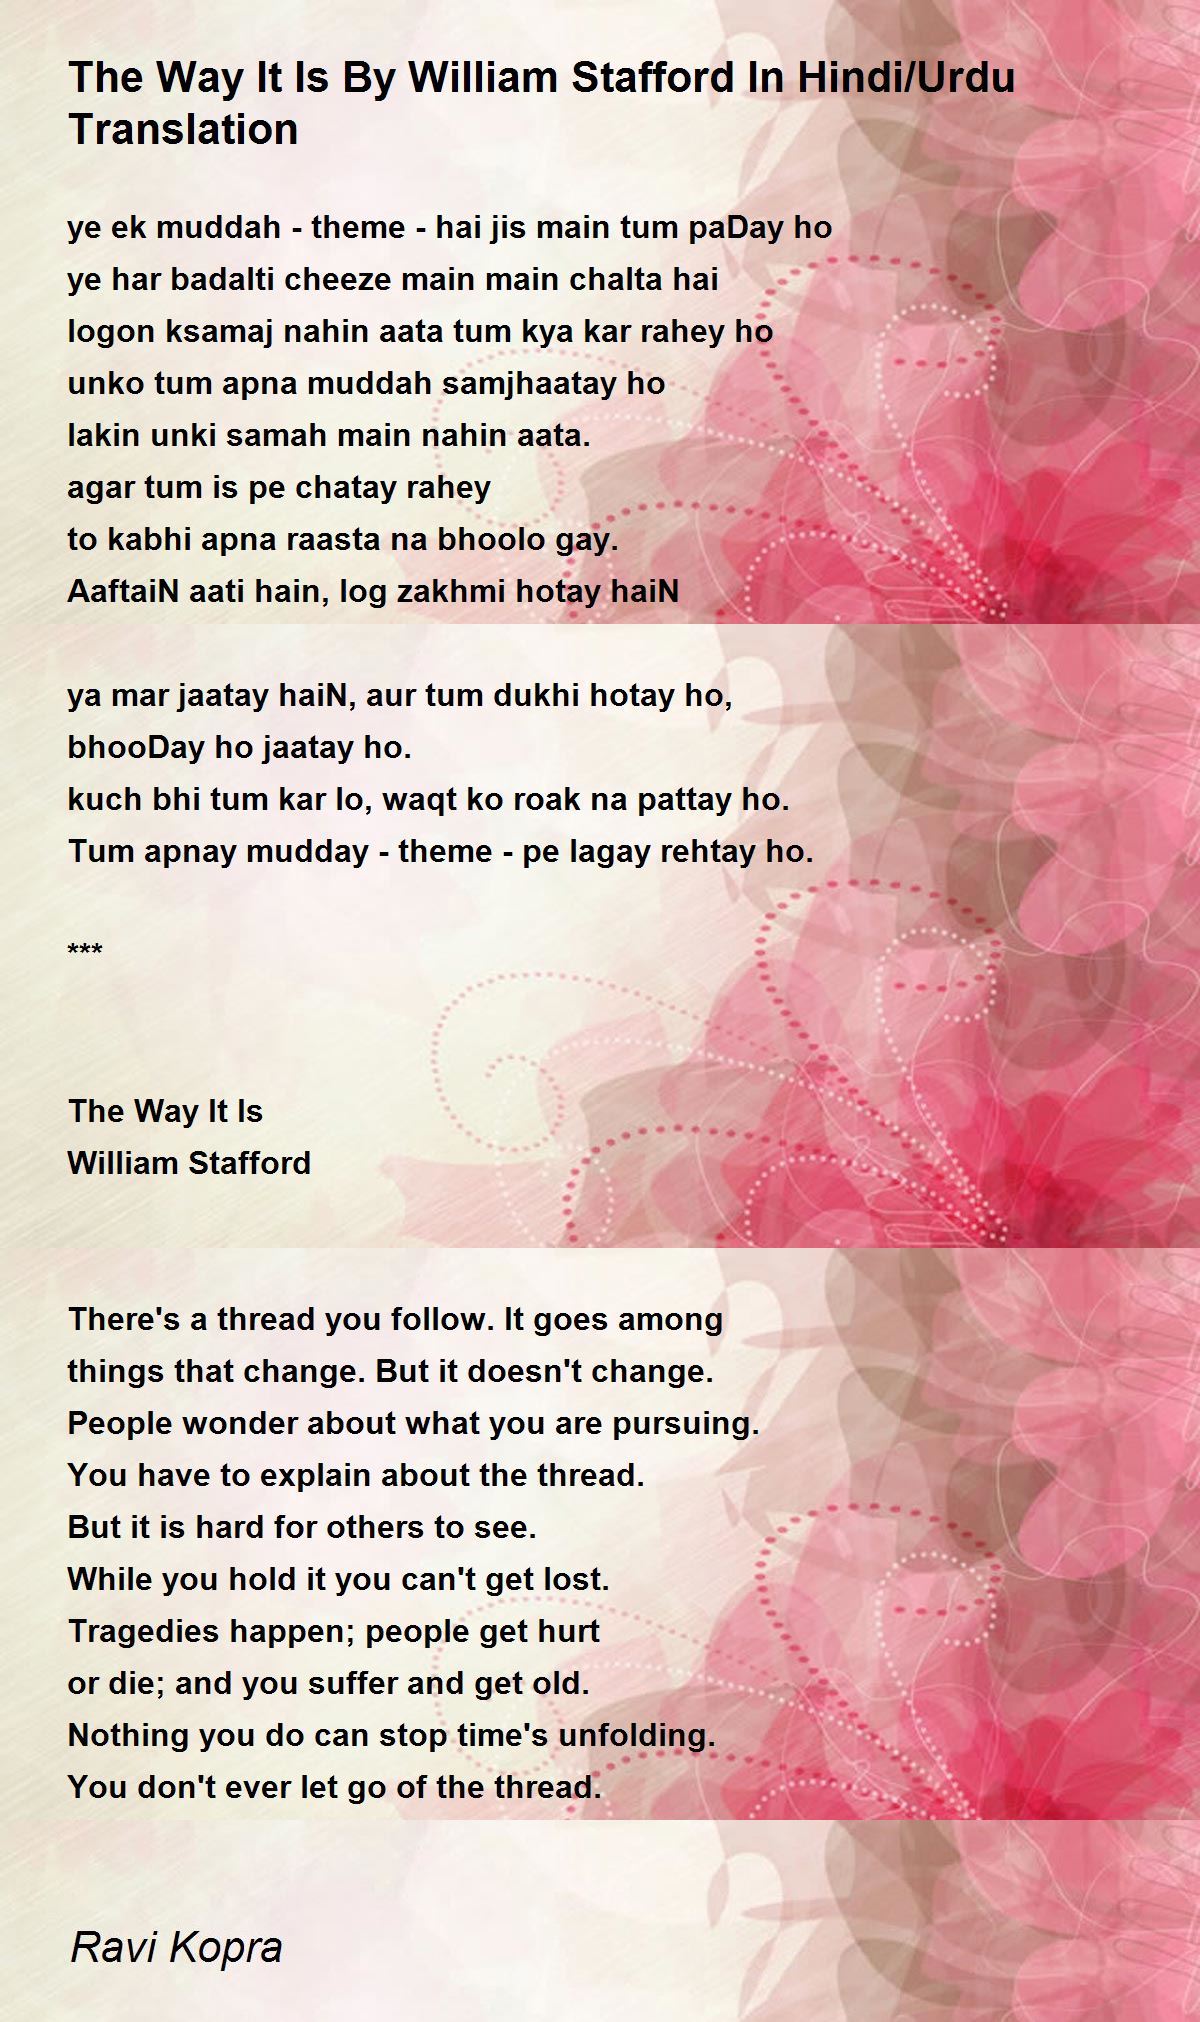 The Way It Is By William Stafford In Hindi Urdu Translation The Way It Is By William Stafford In Hindi Urdu Translation Poem By Ravi Kopra